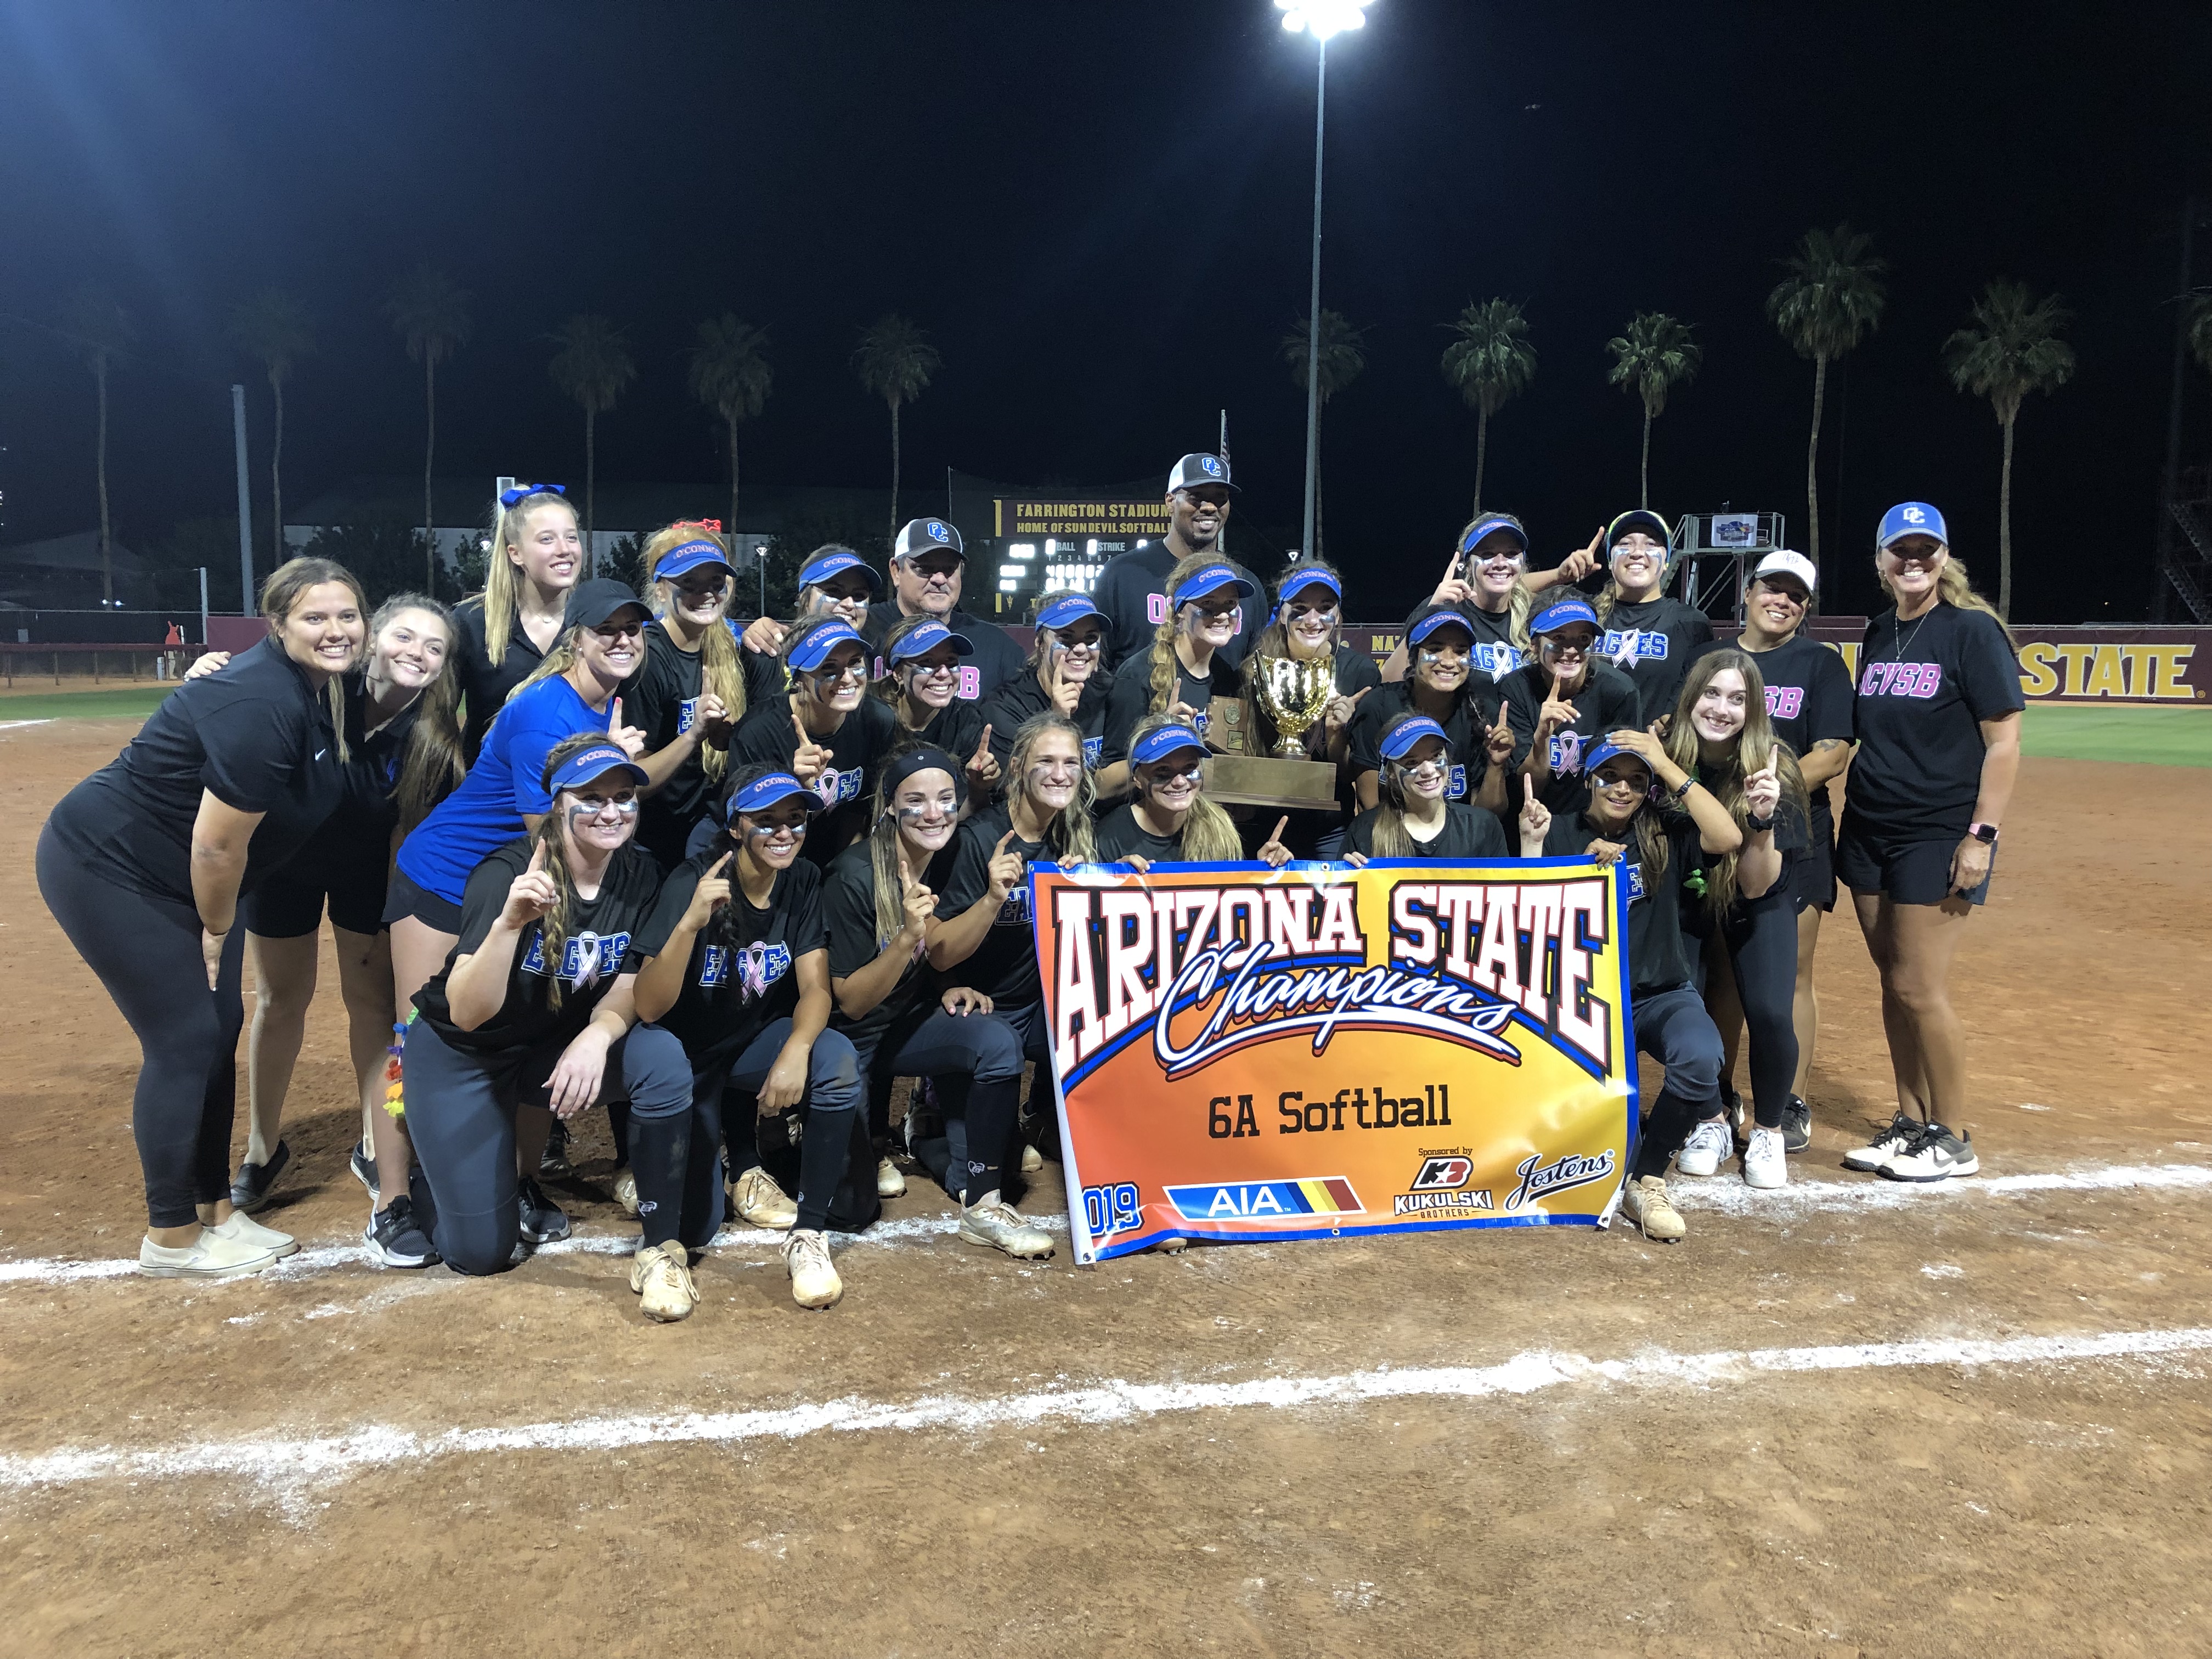 Sandra Day O'Connor claims 6A state title with 64 win over topranked